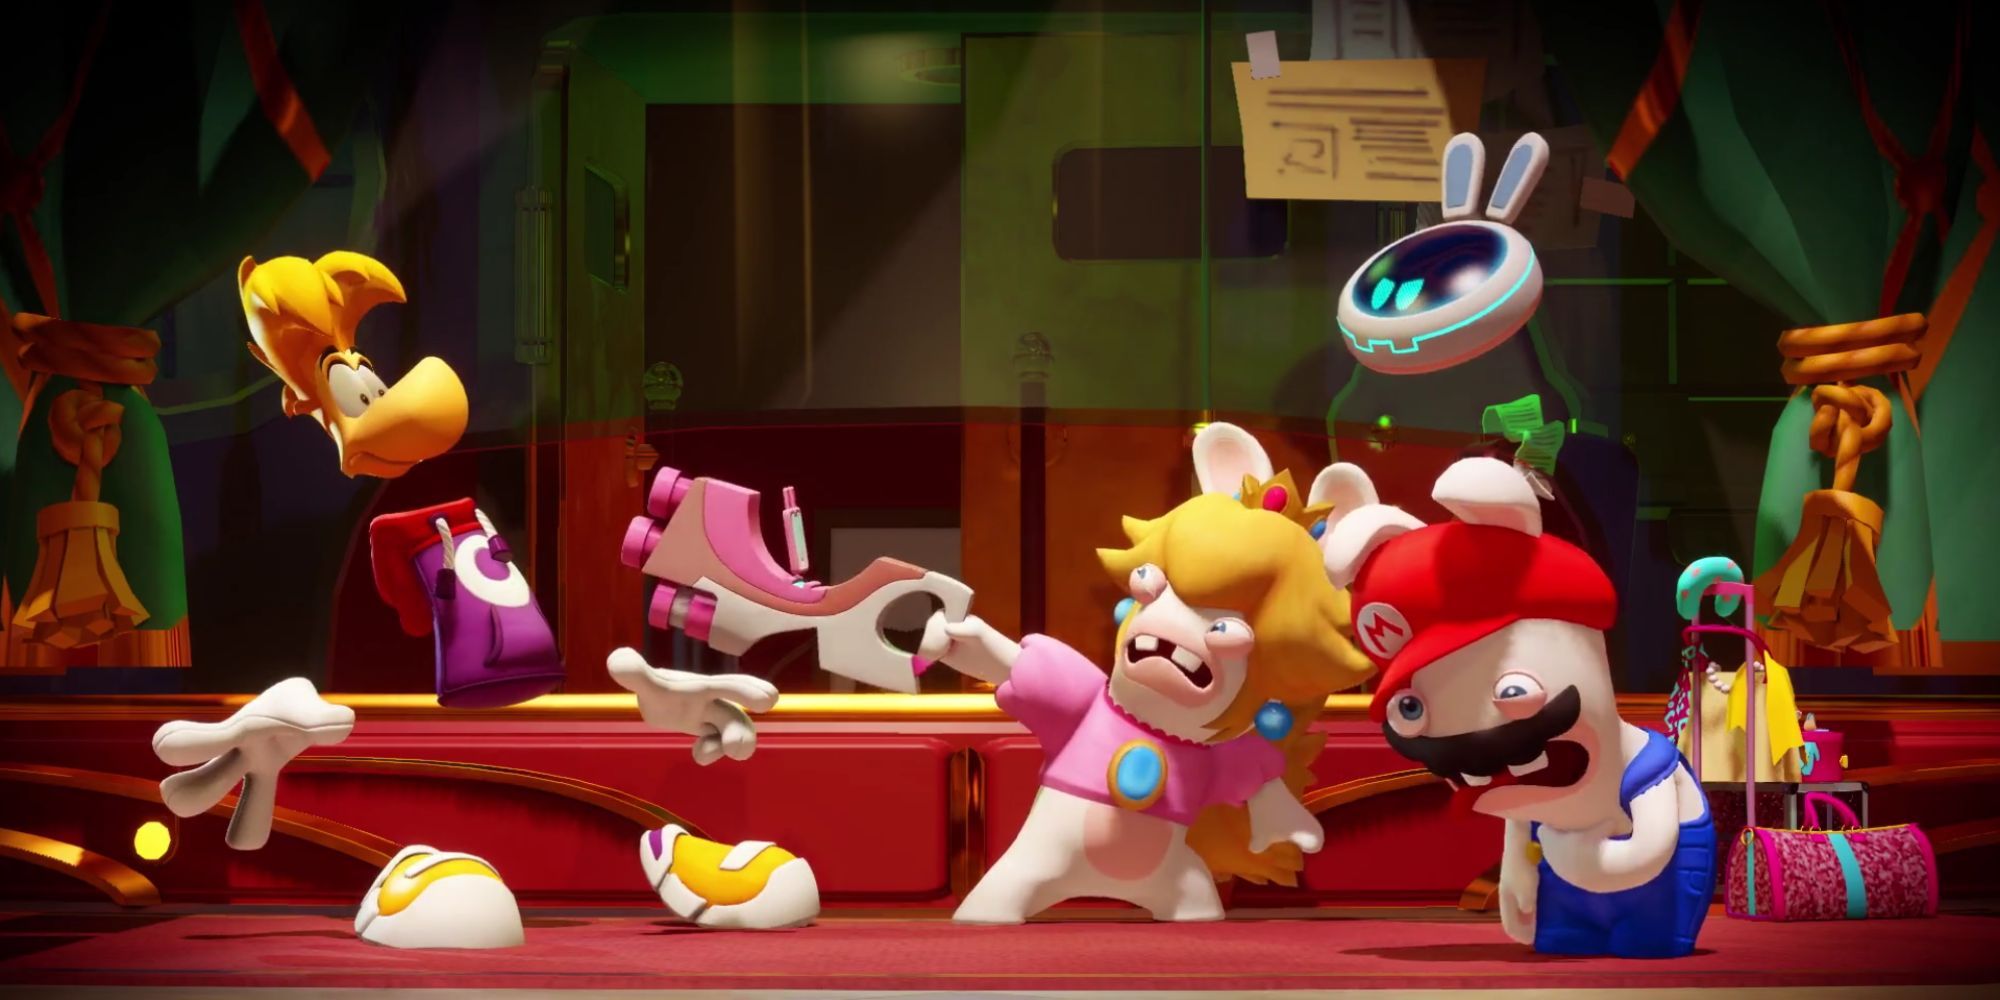 Mario + Rabbids Spark of Hope Will be Announced at Ubisoft Forward – Rumour